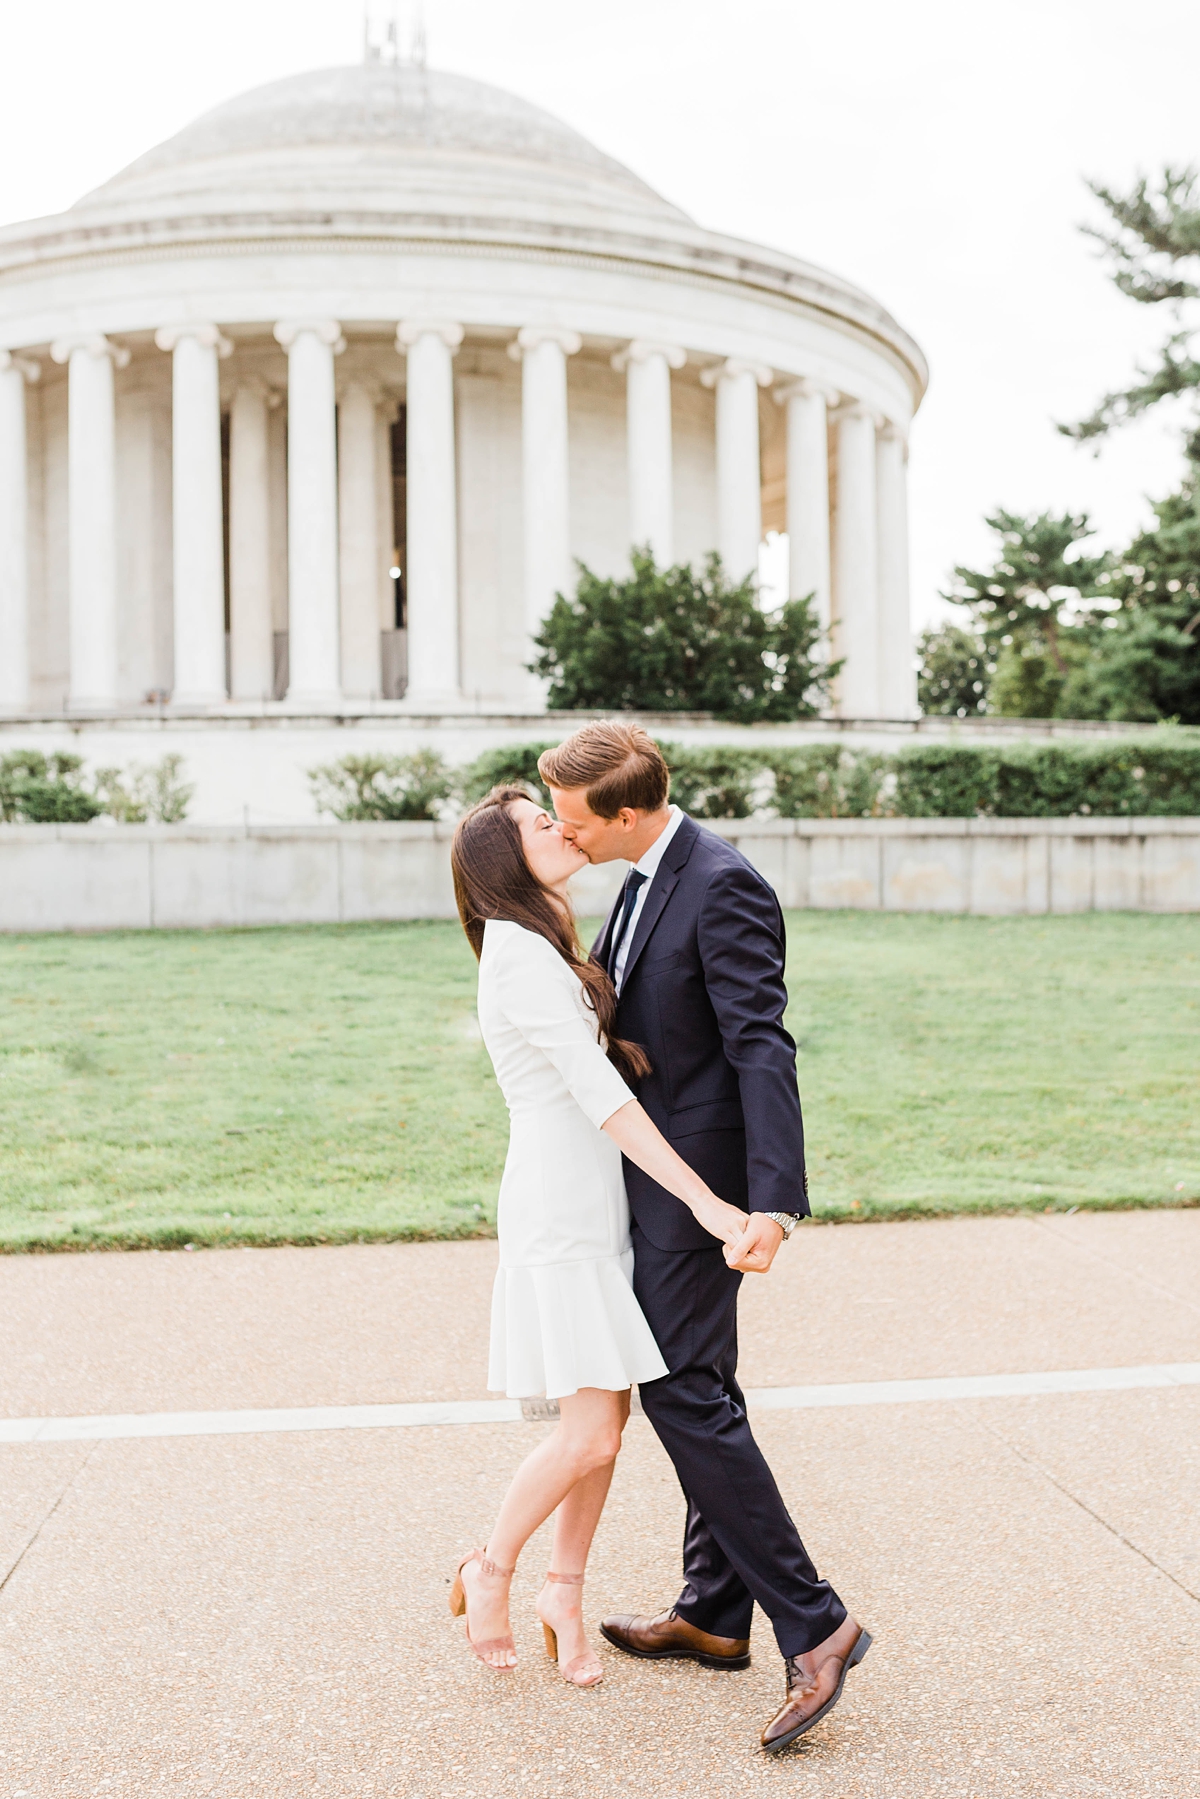 Couples Anniversary Session at the Thomas Jefferson Memorial in Washington, D.C., wedding photography, little white dress and classic black suit and tie, dressy outfits for engagement photos